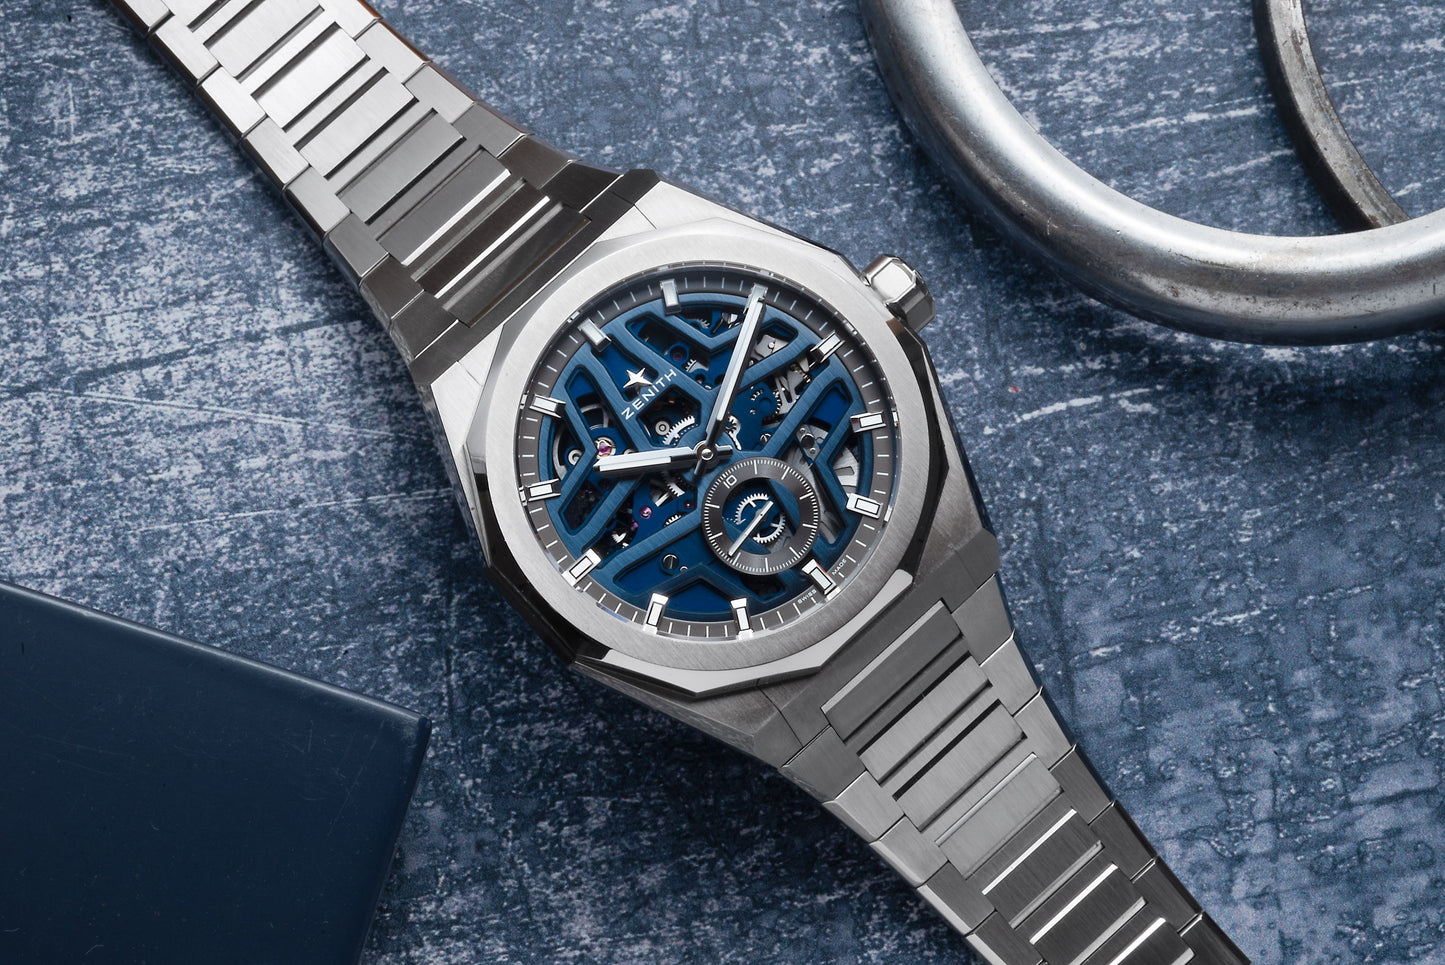 Zenith - Defy Skyline Skeleton, Time and Watches